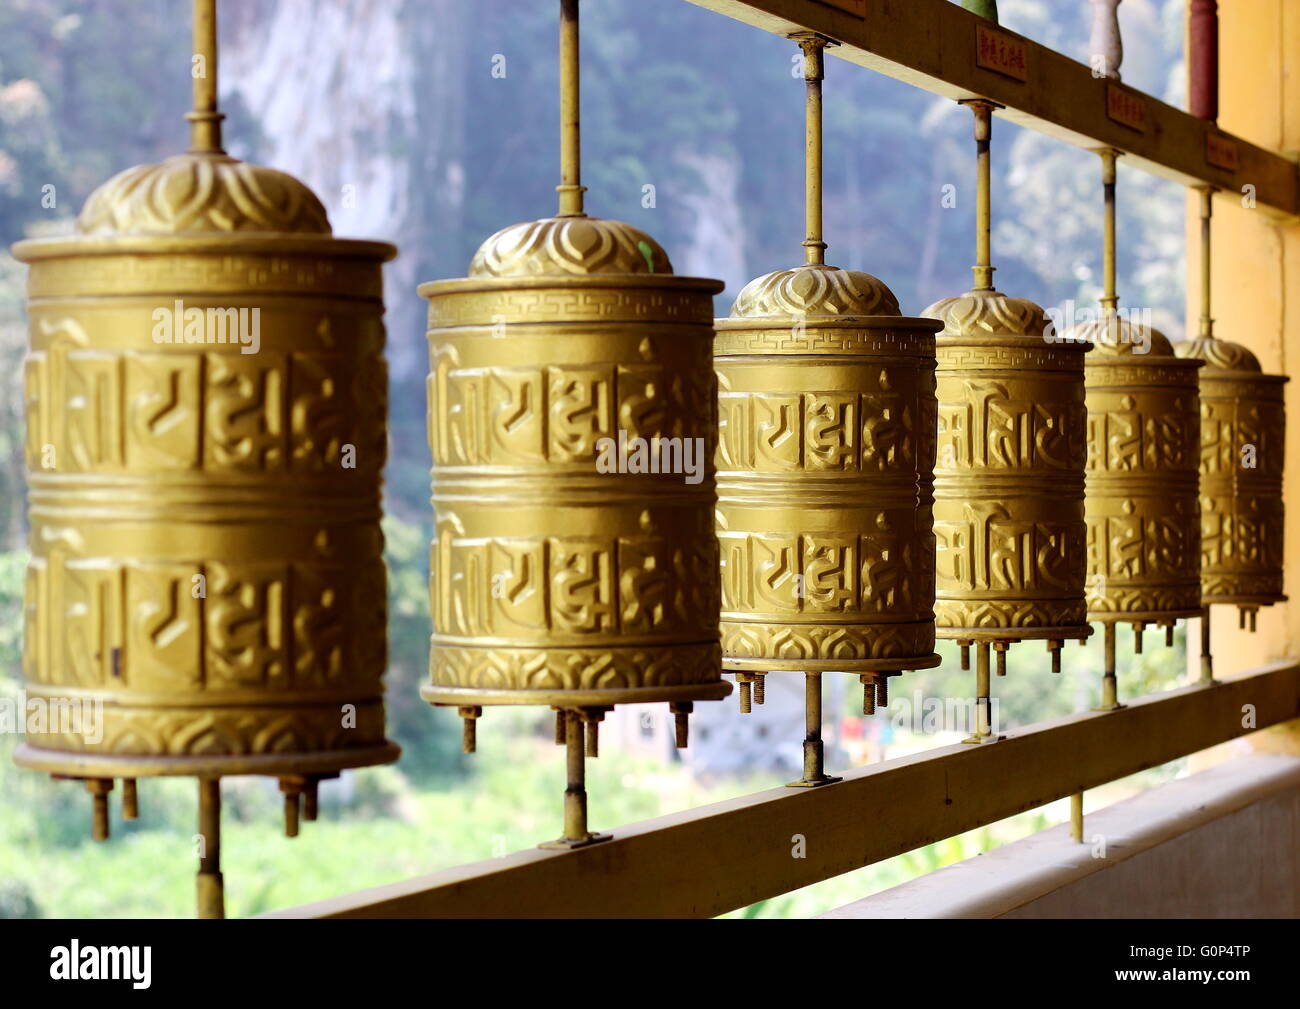 Buddhist prayer wheels which is an important and prominent feature in a Tibetan monastery or temple. Stock Photo